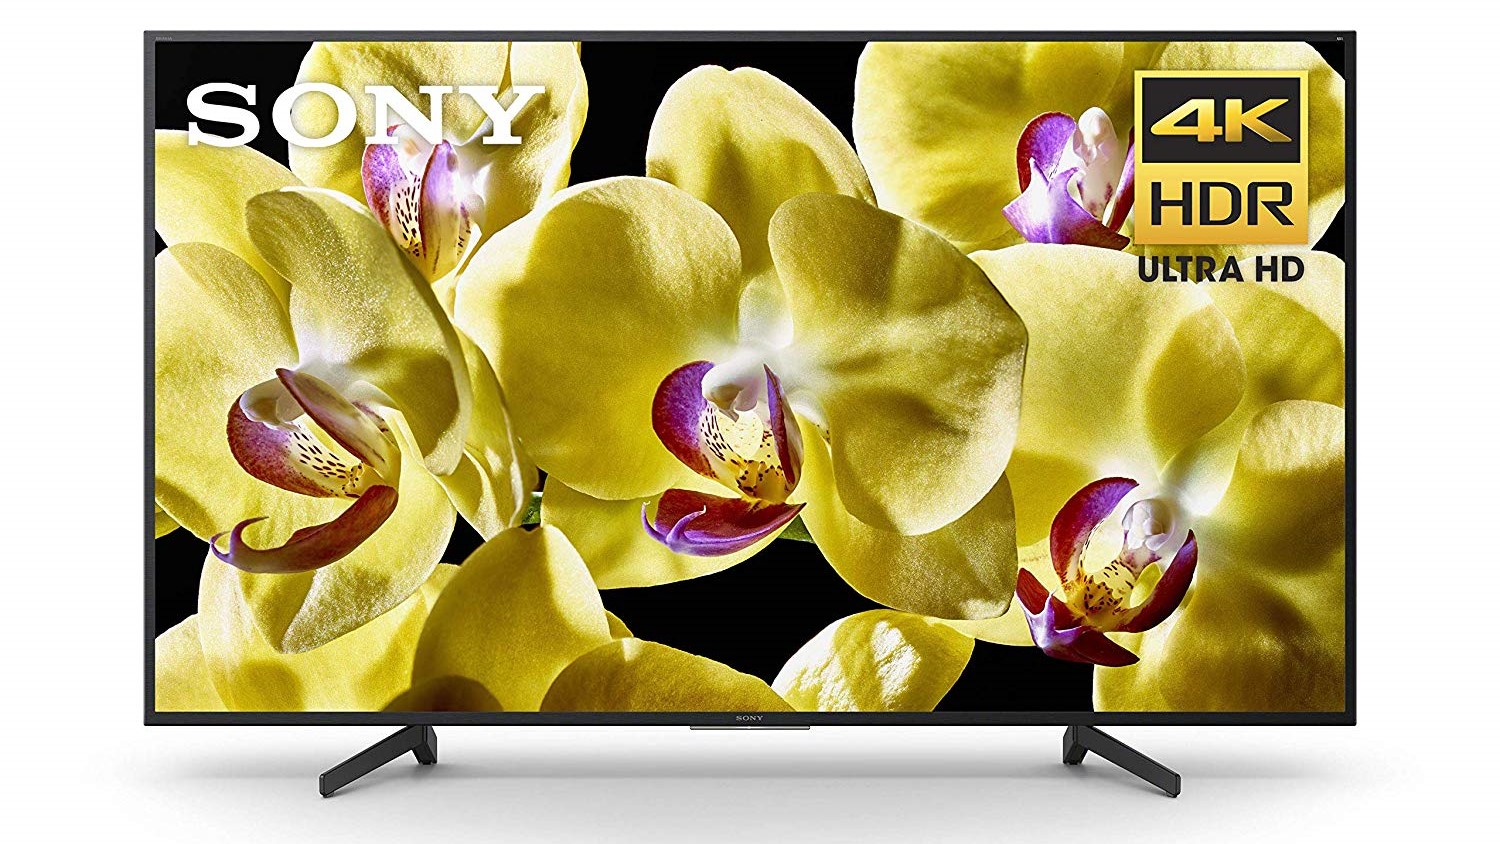 Sony 4K Ultra HD Smart LED TV with HDR